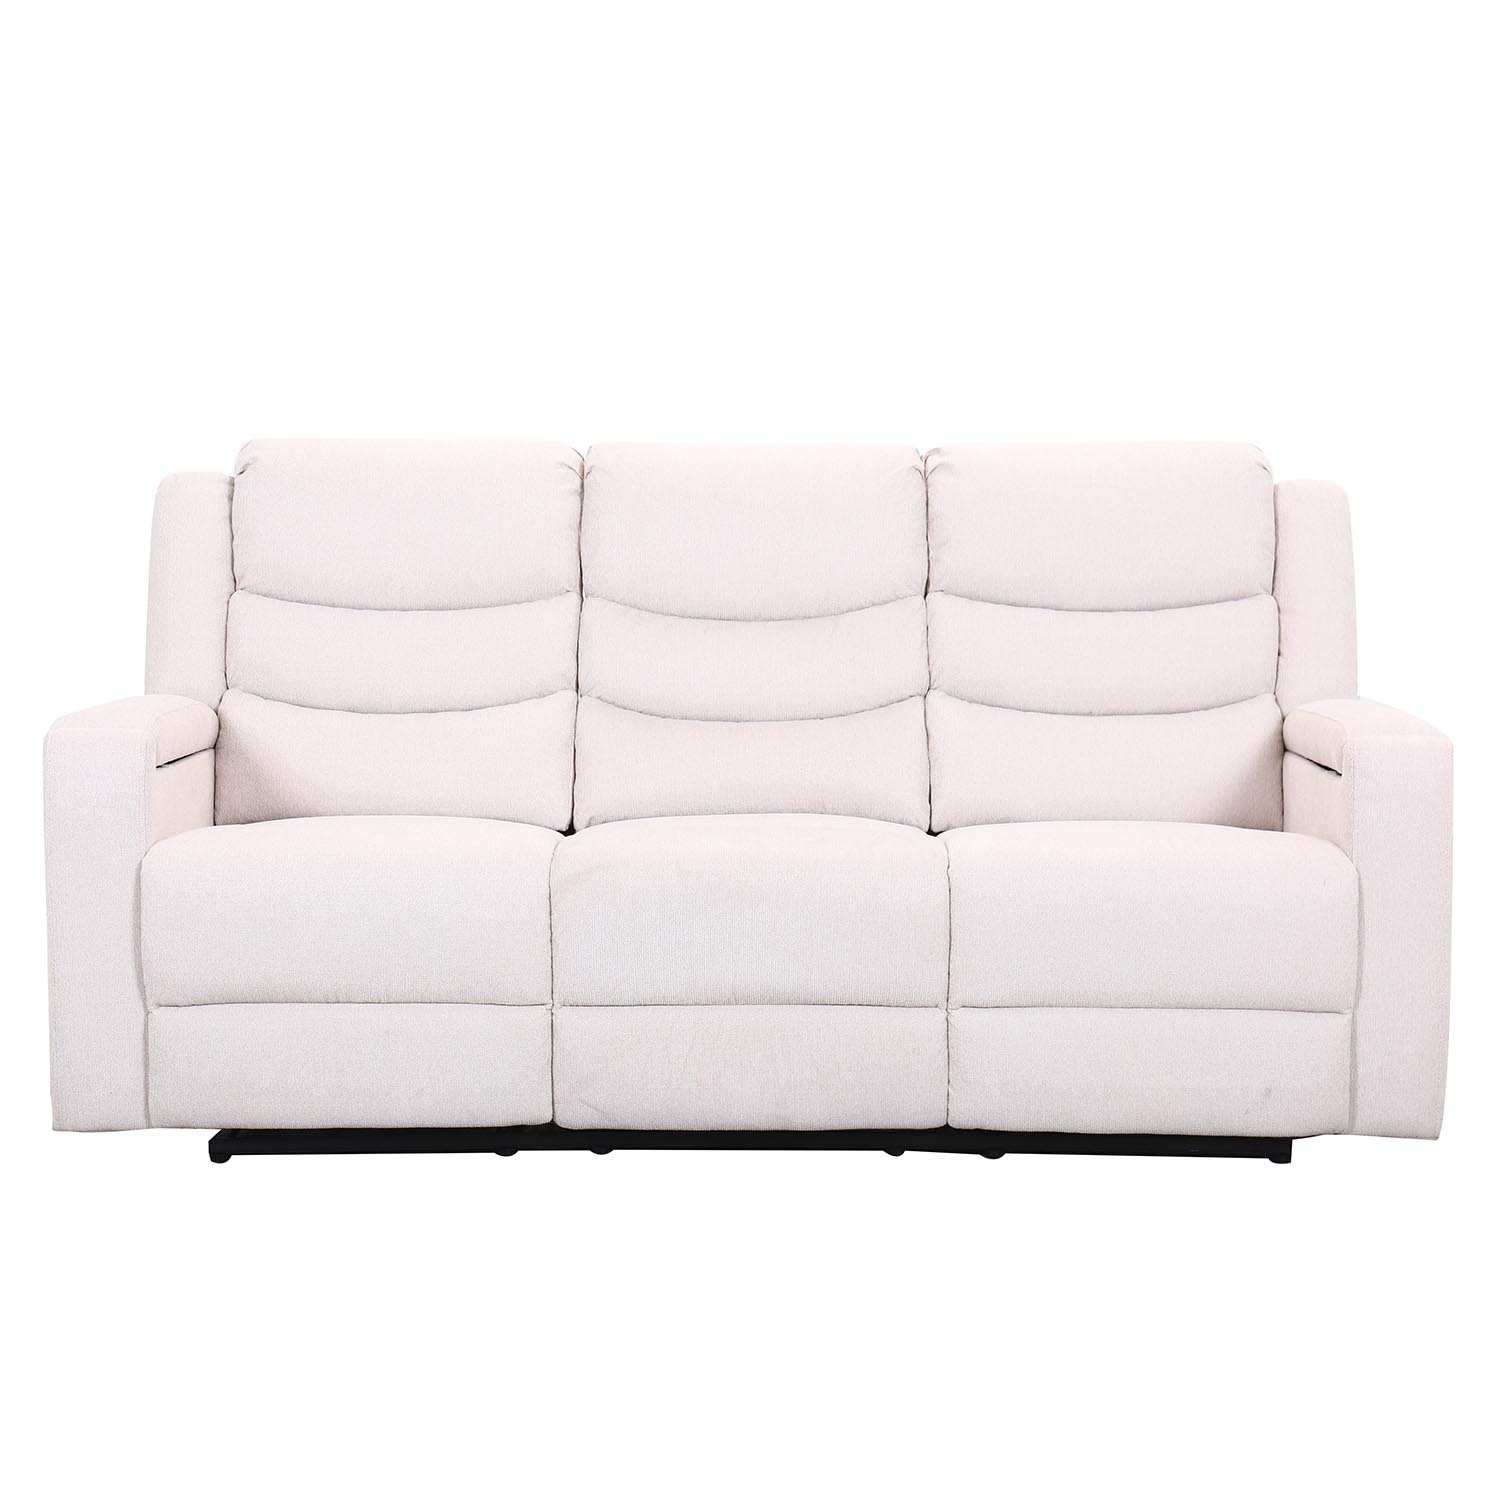 Heritage 3 Seater Ivory Recliner Sofa Image 2